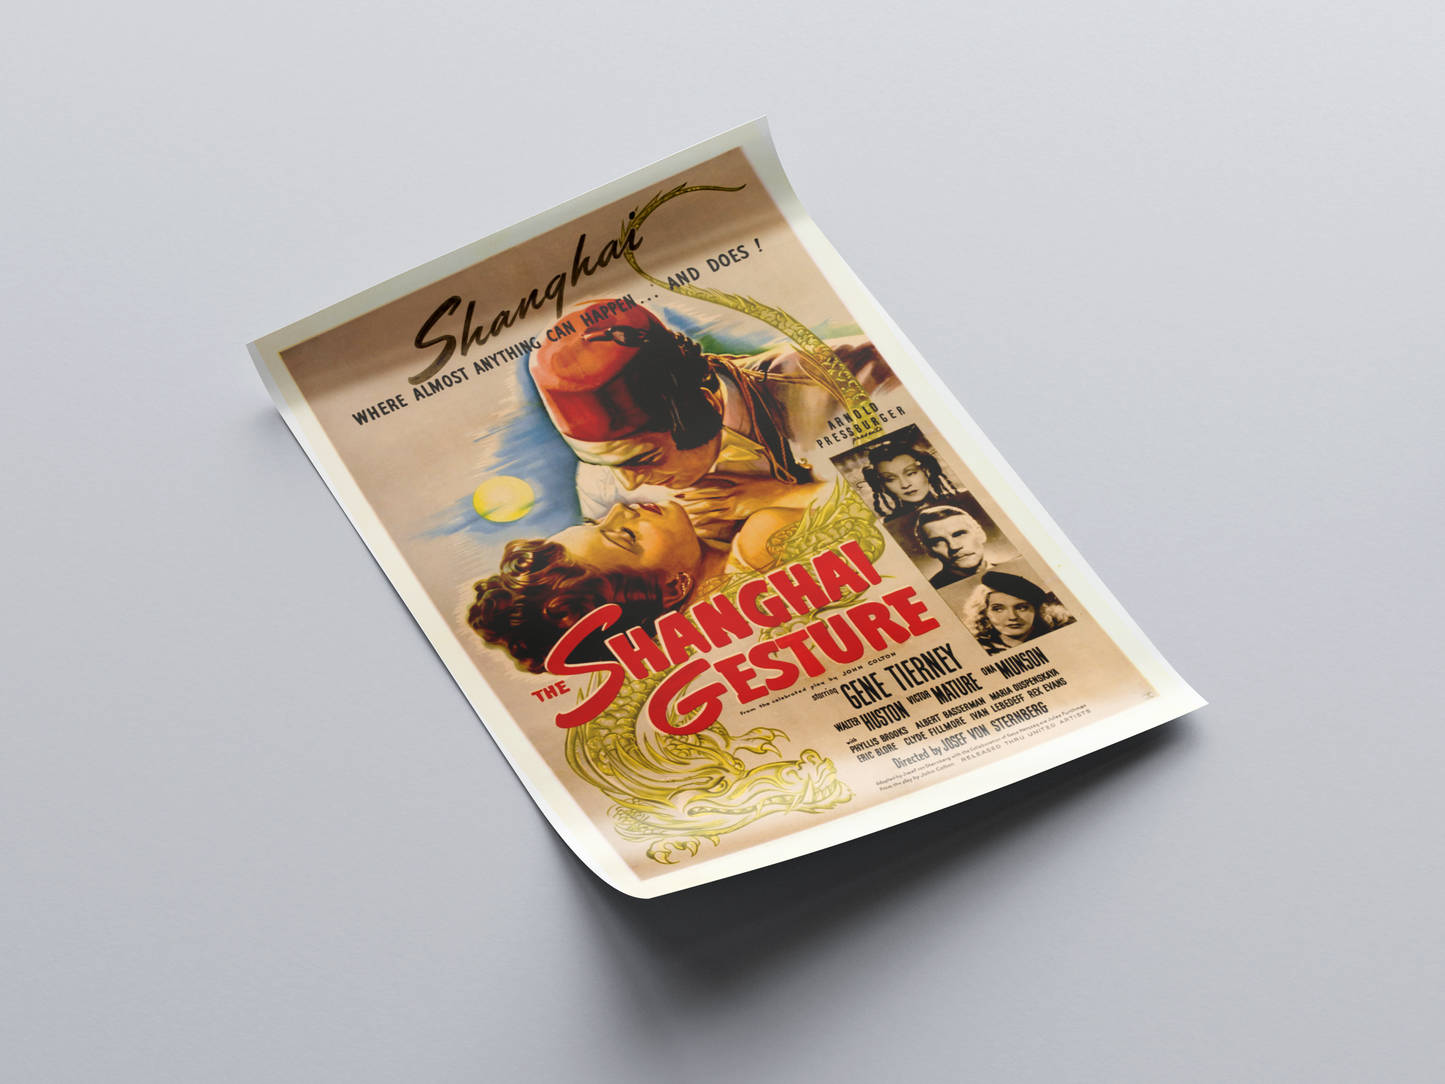 The Shanghai Gesture (1941) Movie Poster displayed in interior setting